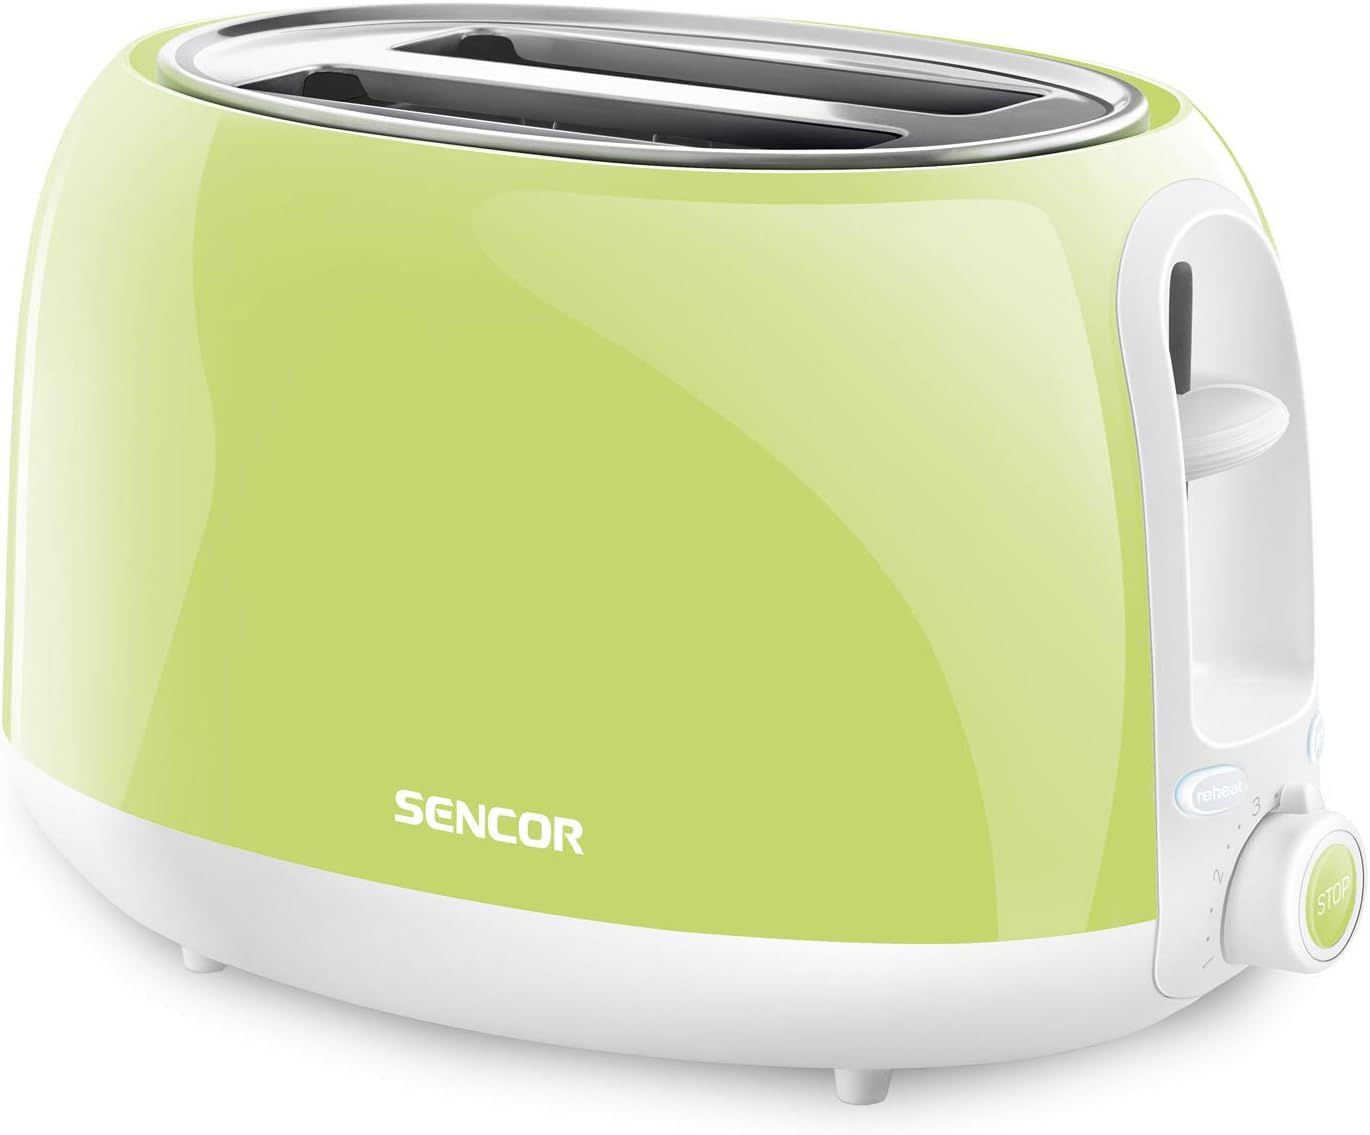 Sencor 2-Slot High Lift Toaster with Safe Cool Touch Technology, Medium, Lime Green | Amazon (US)